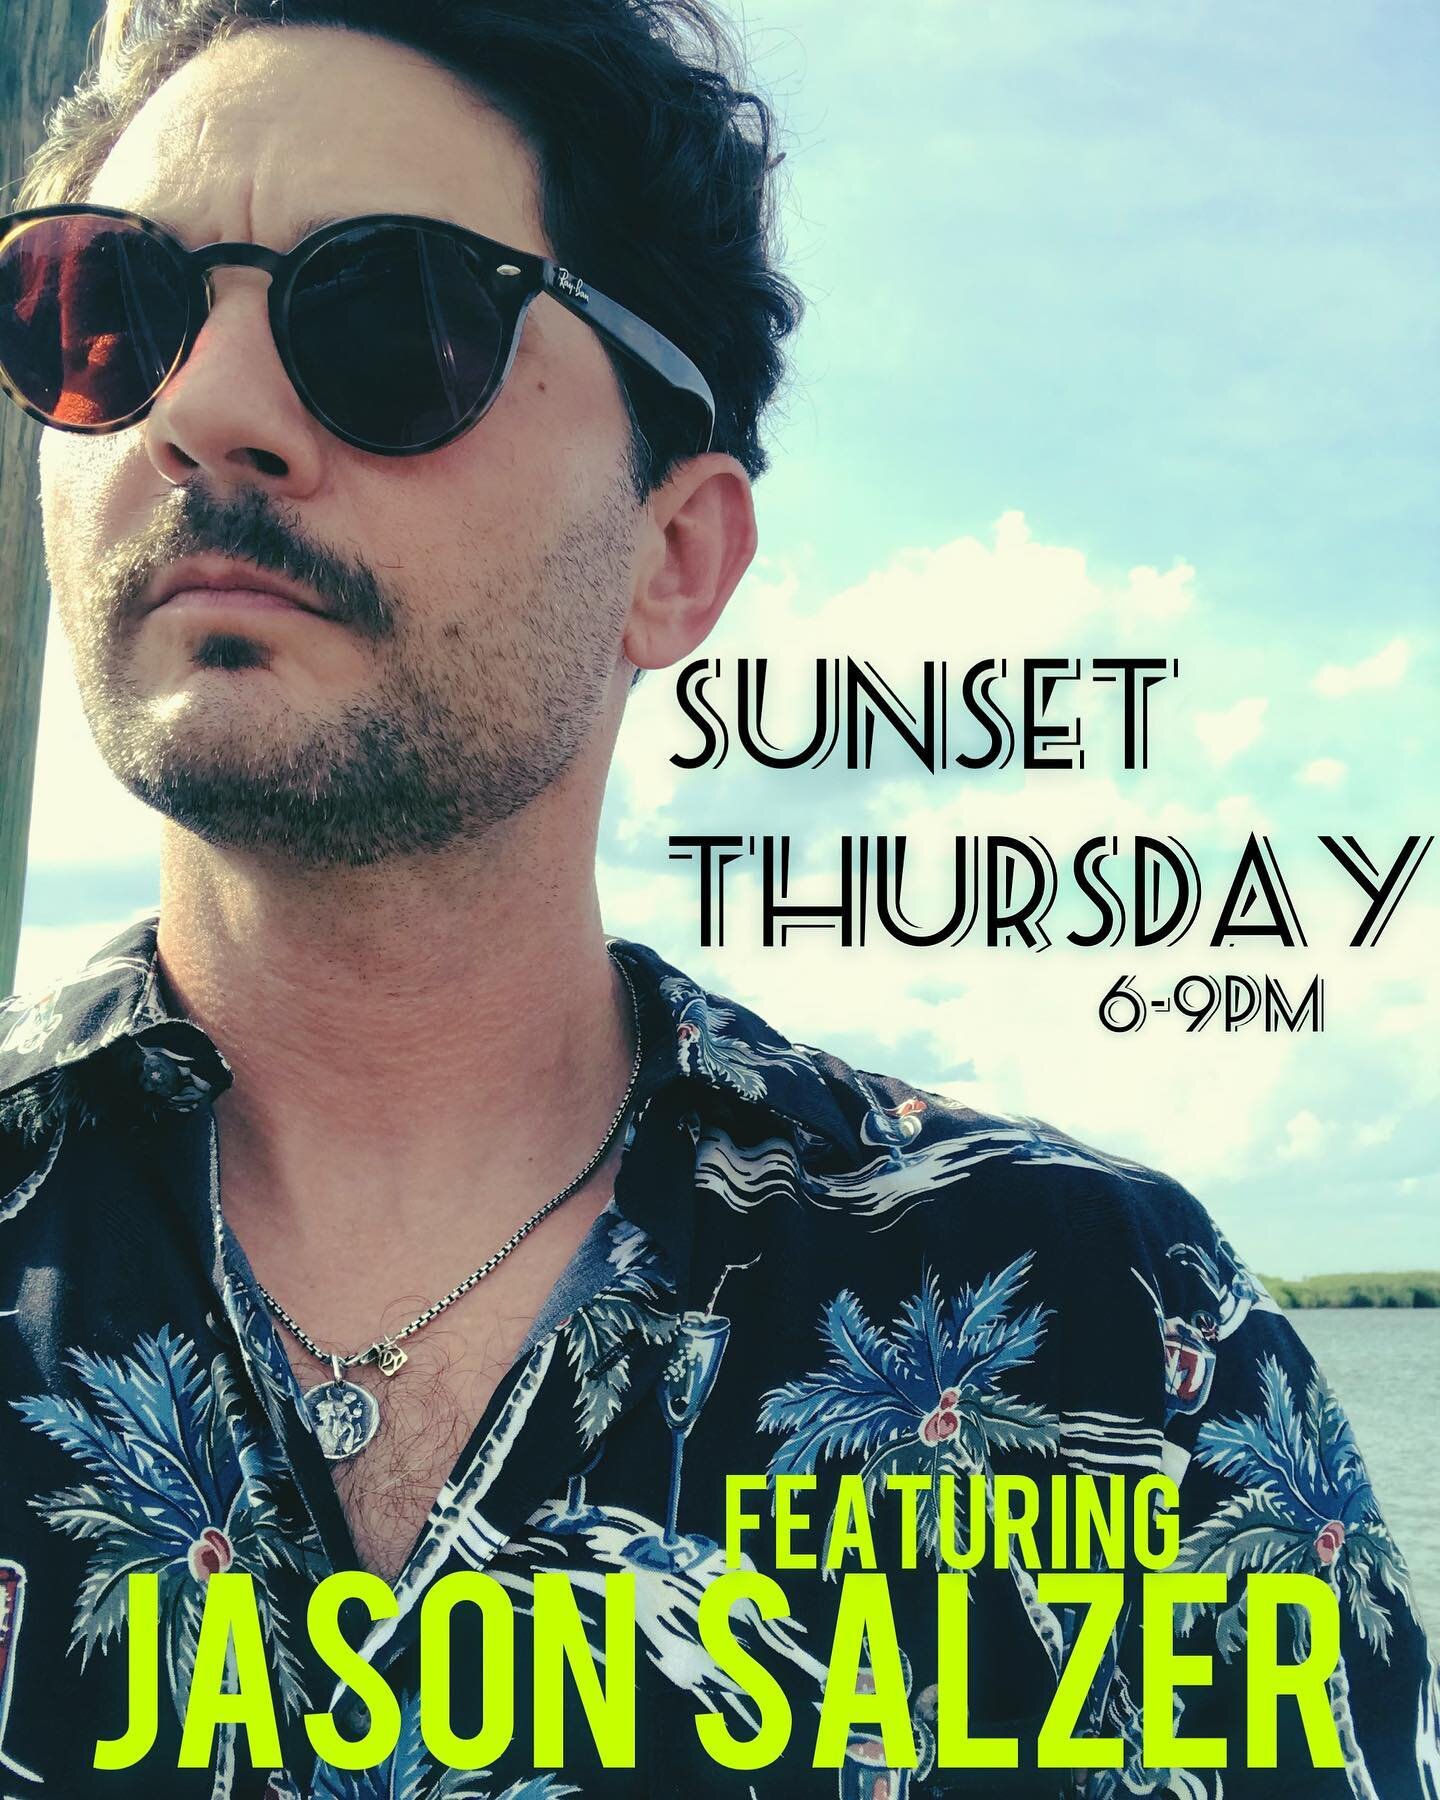 Sunset Thursday this week will feature live music from Jason Salzer! Come on out and enjoy good food, good fun, and good music 🎶